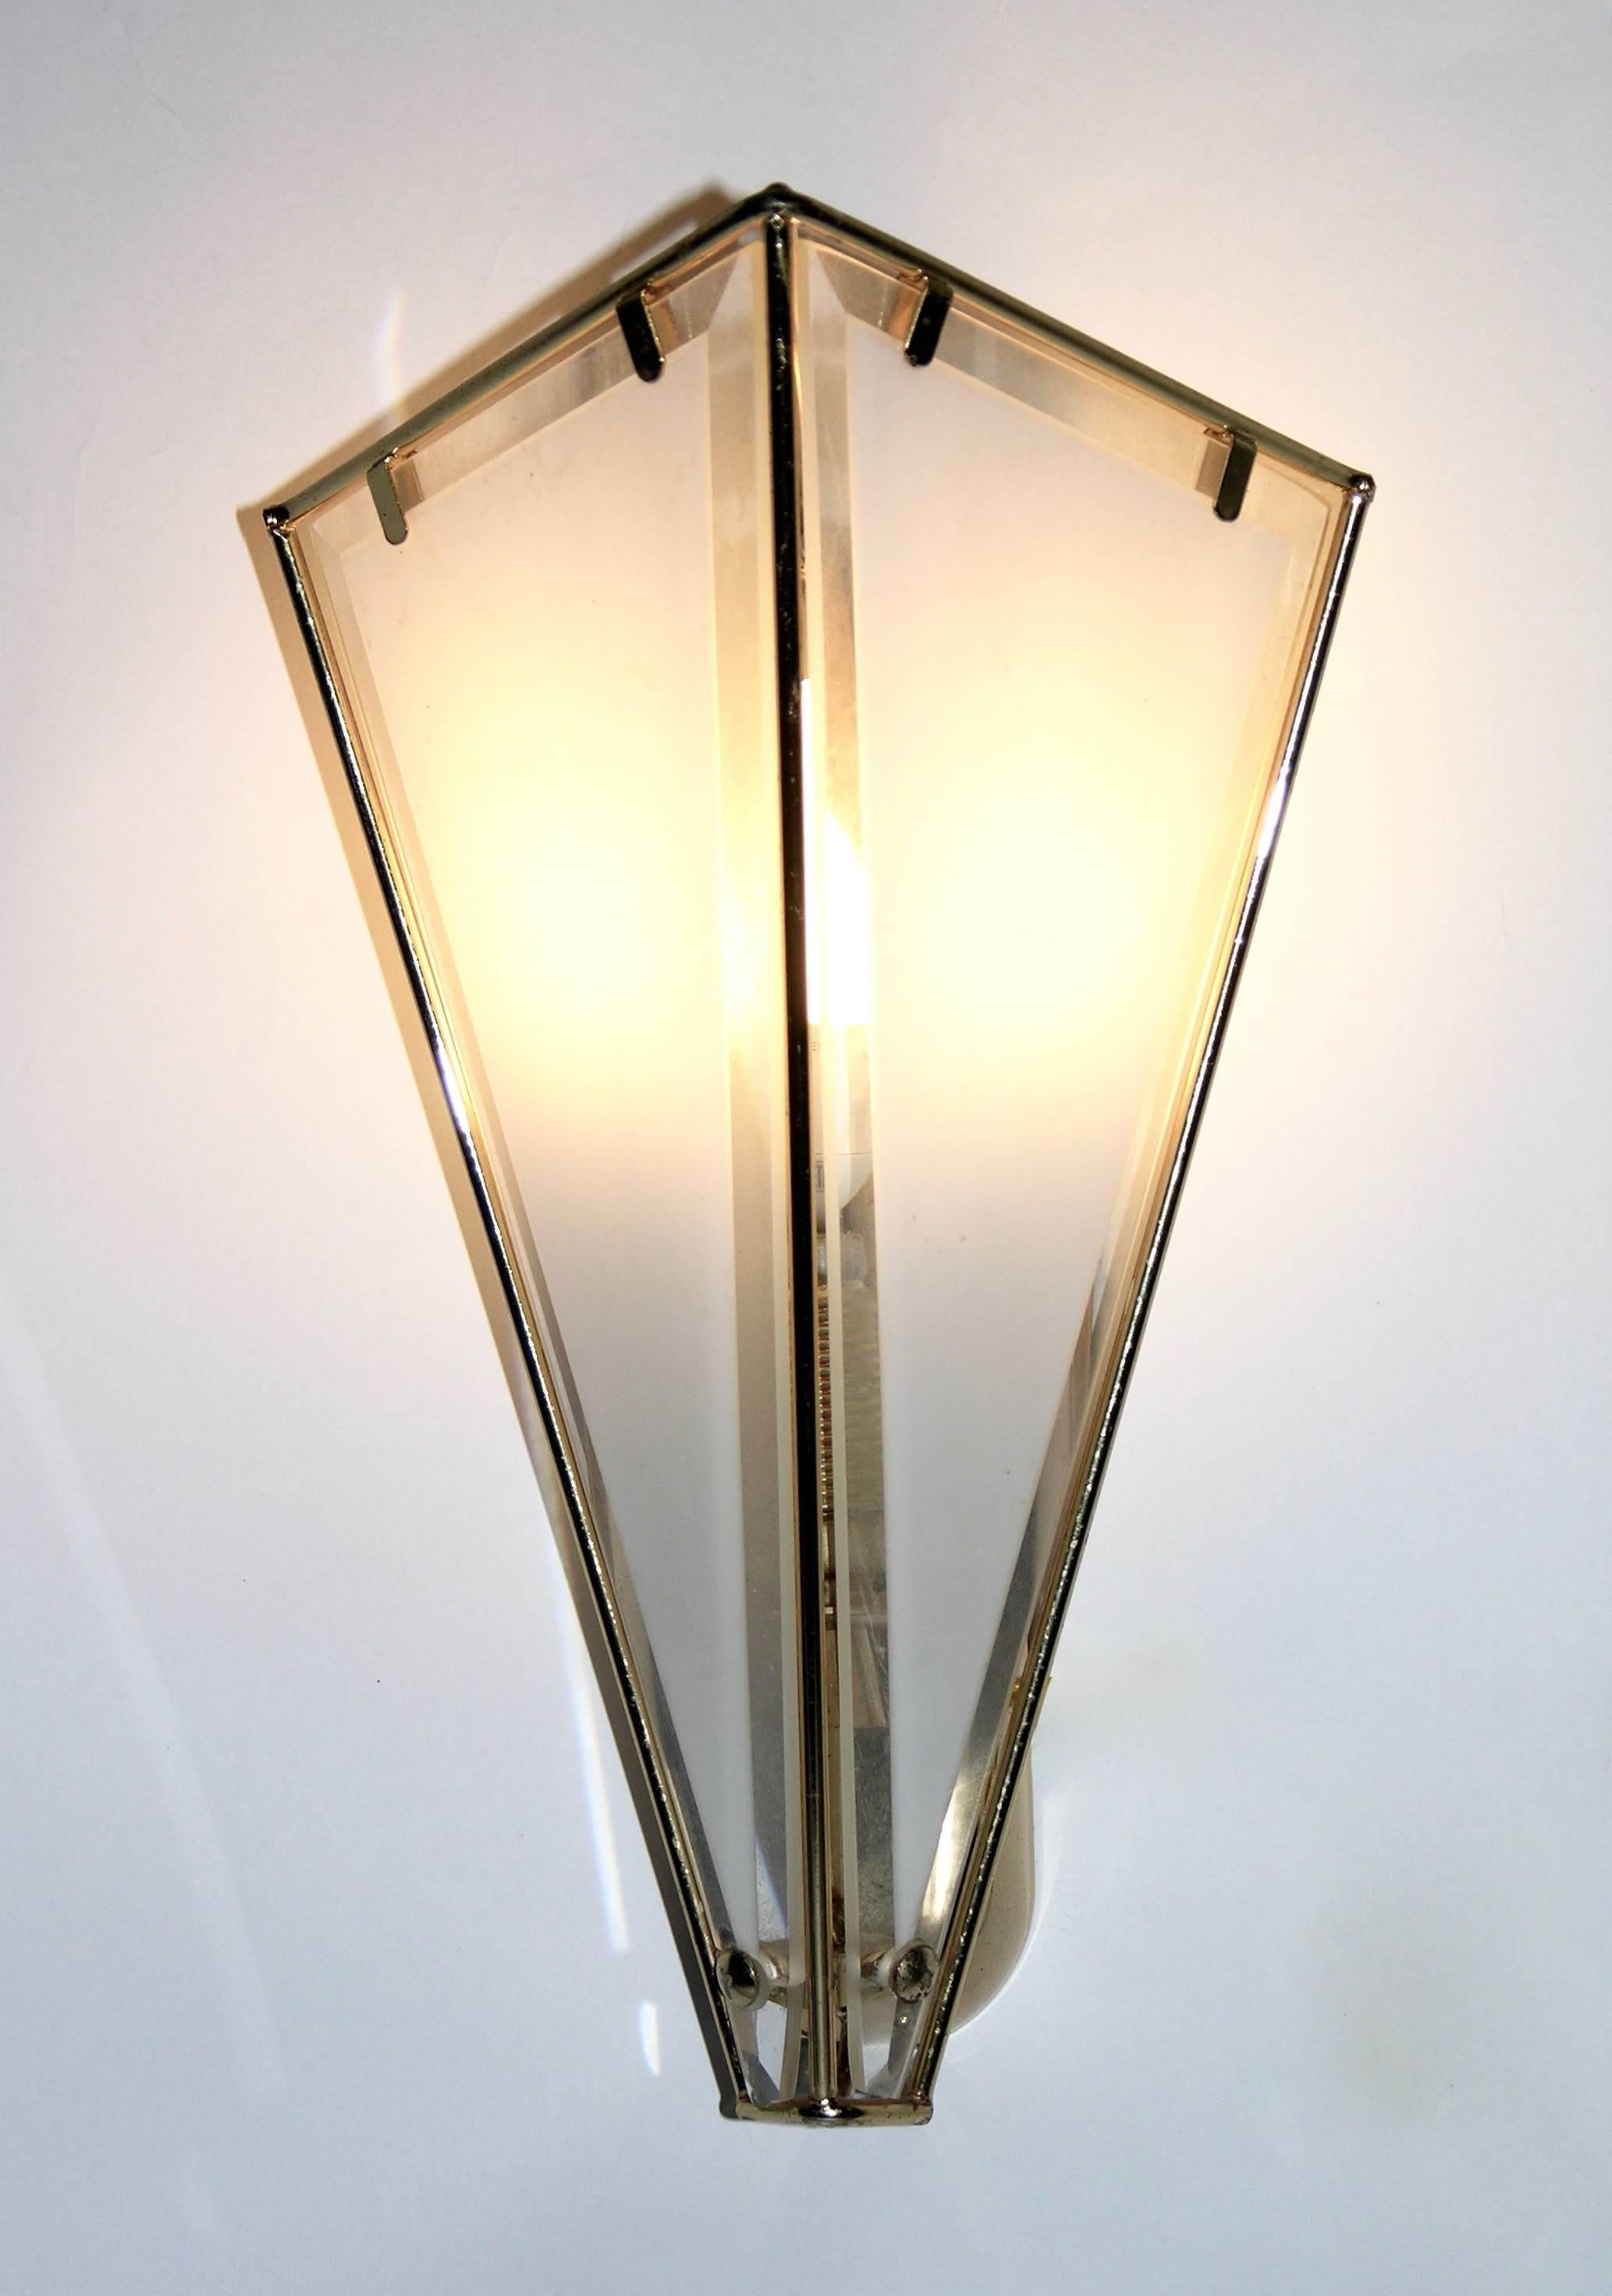 A charming pair of Italian sconces by Metalarte, the unusual triangular shape giving elegance with clean lines, quality of execution with hand made brass structure decorated with white frosted glass panels highlighted with elaborate clear beveled